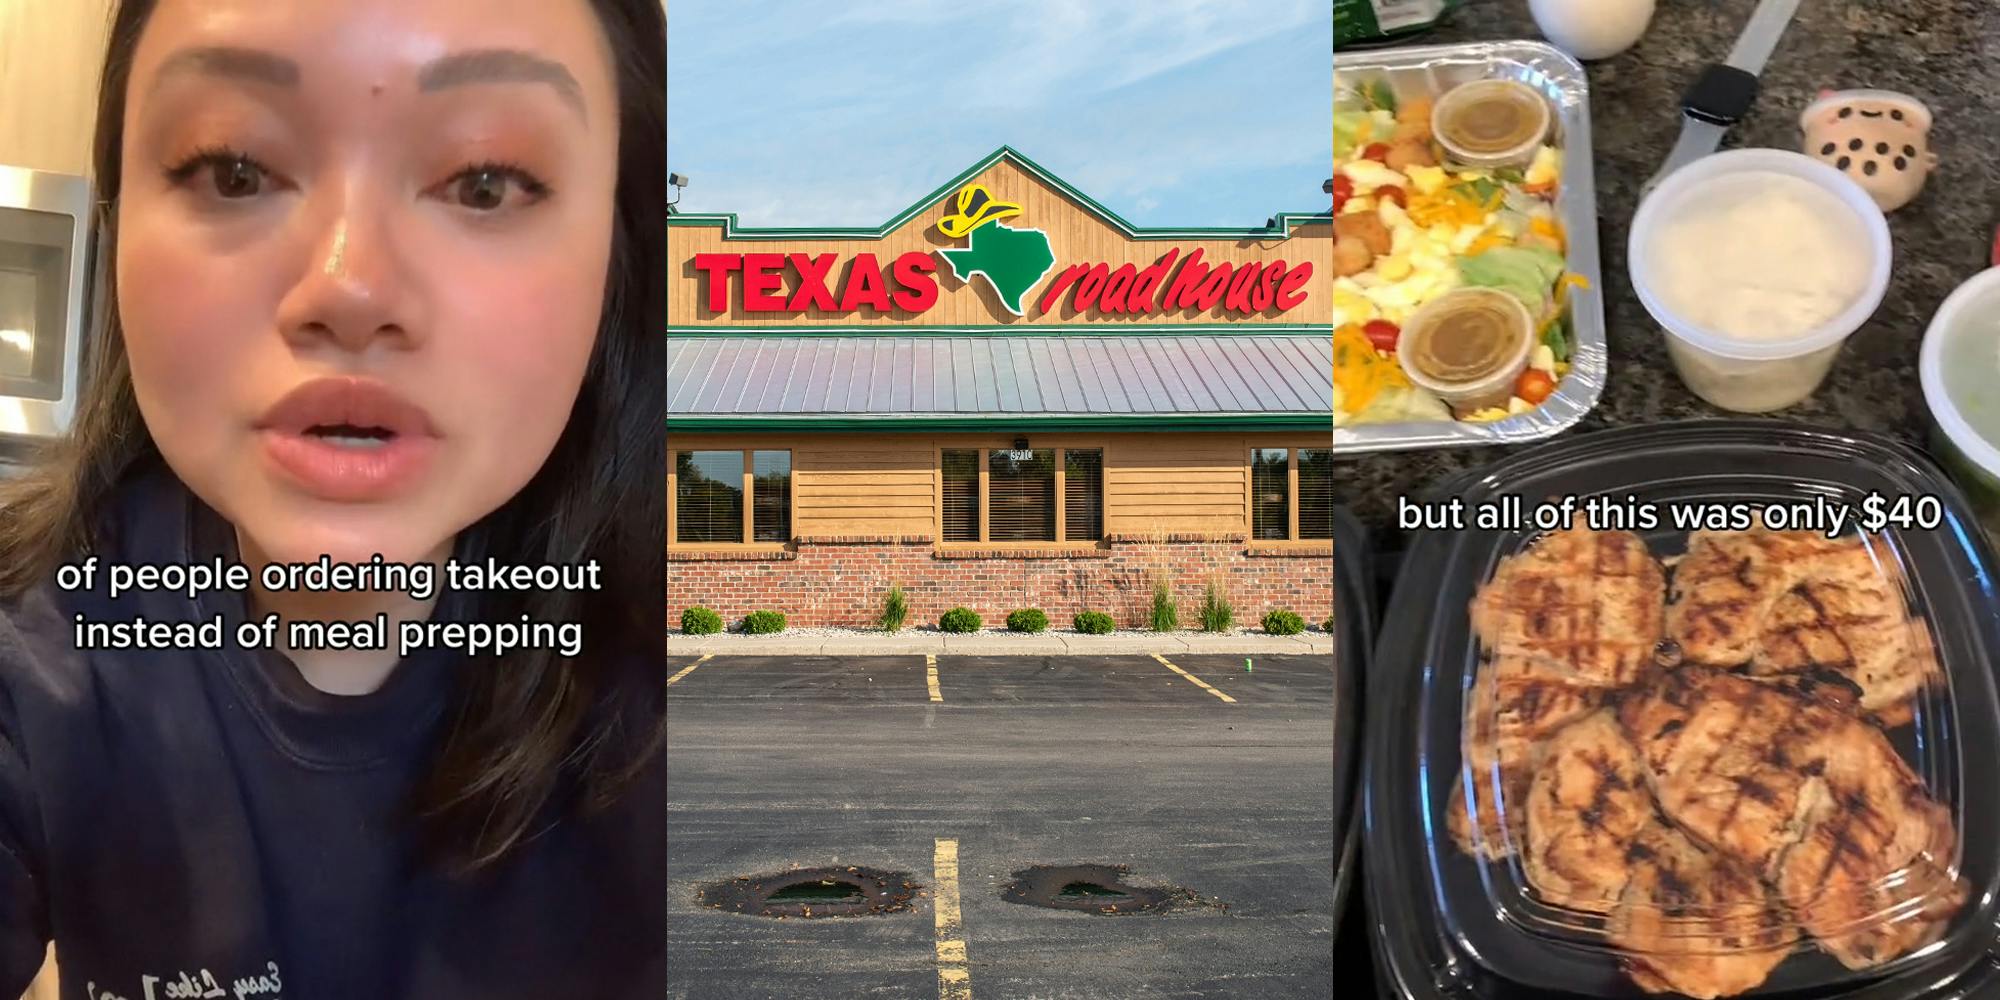 Texas Roadhouse customer speaking with caption "of people ordering takeout instead of meal prepping" (l) Texas Roadhouse building with parking lot sign and blue sky (c) Texas Roadhouse food on counter with caption "but all of this was only $40" (r)